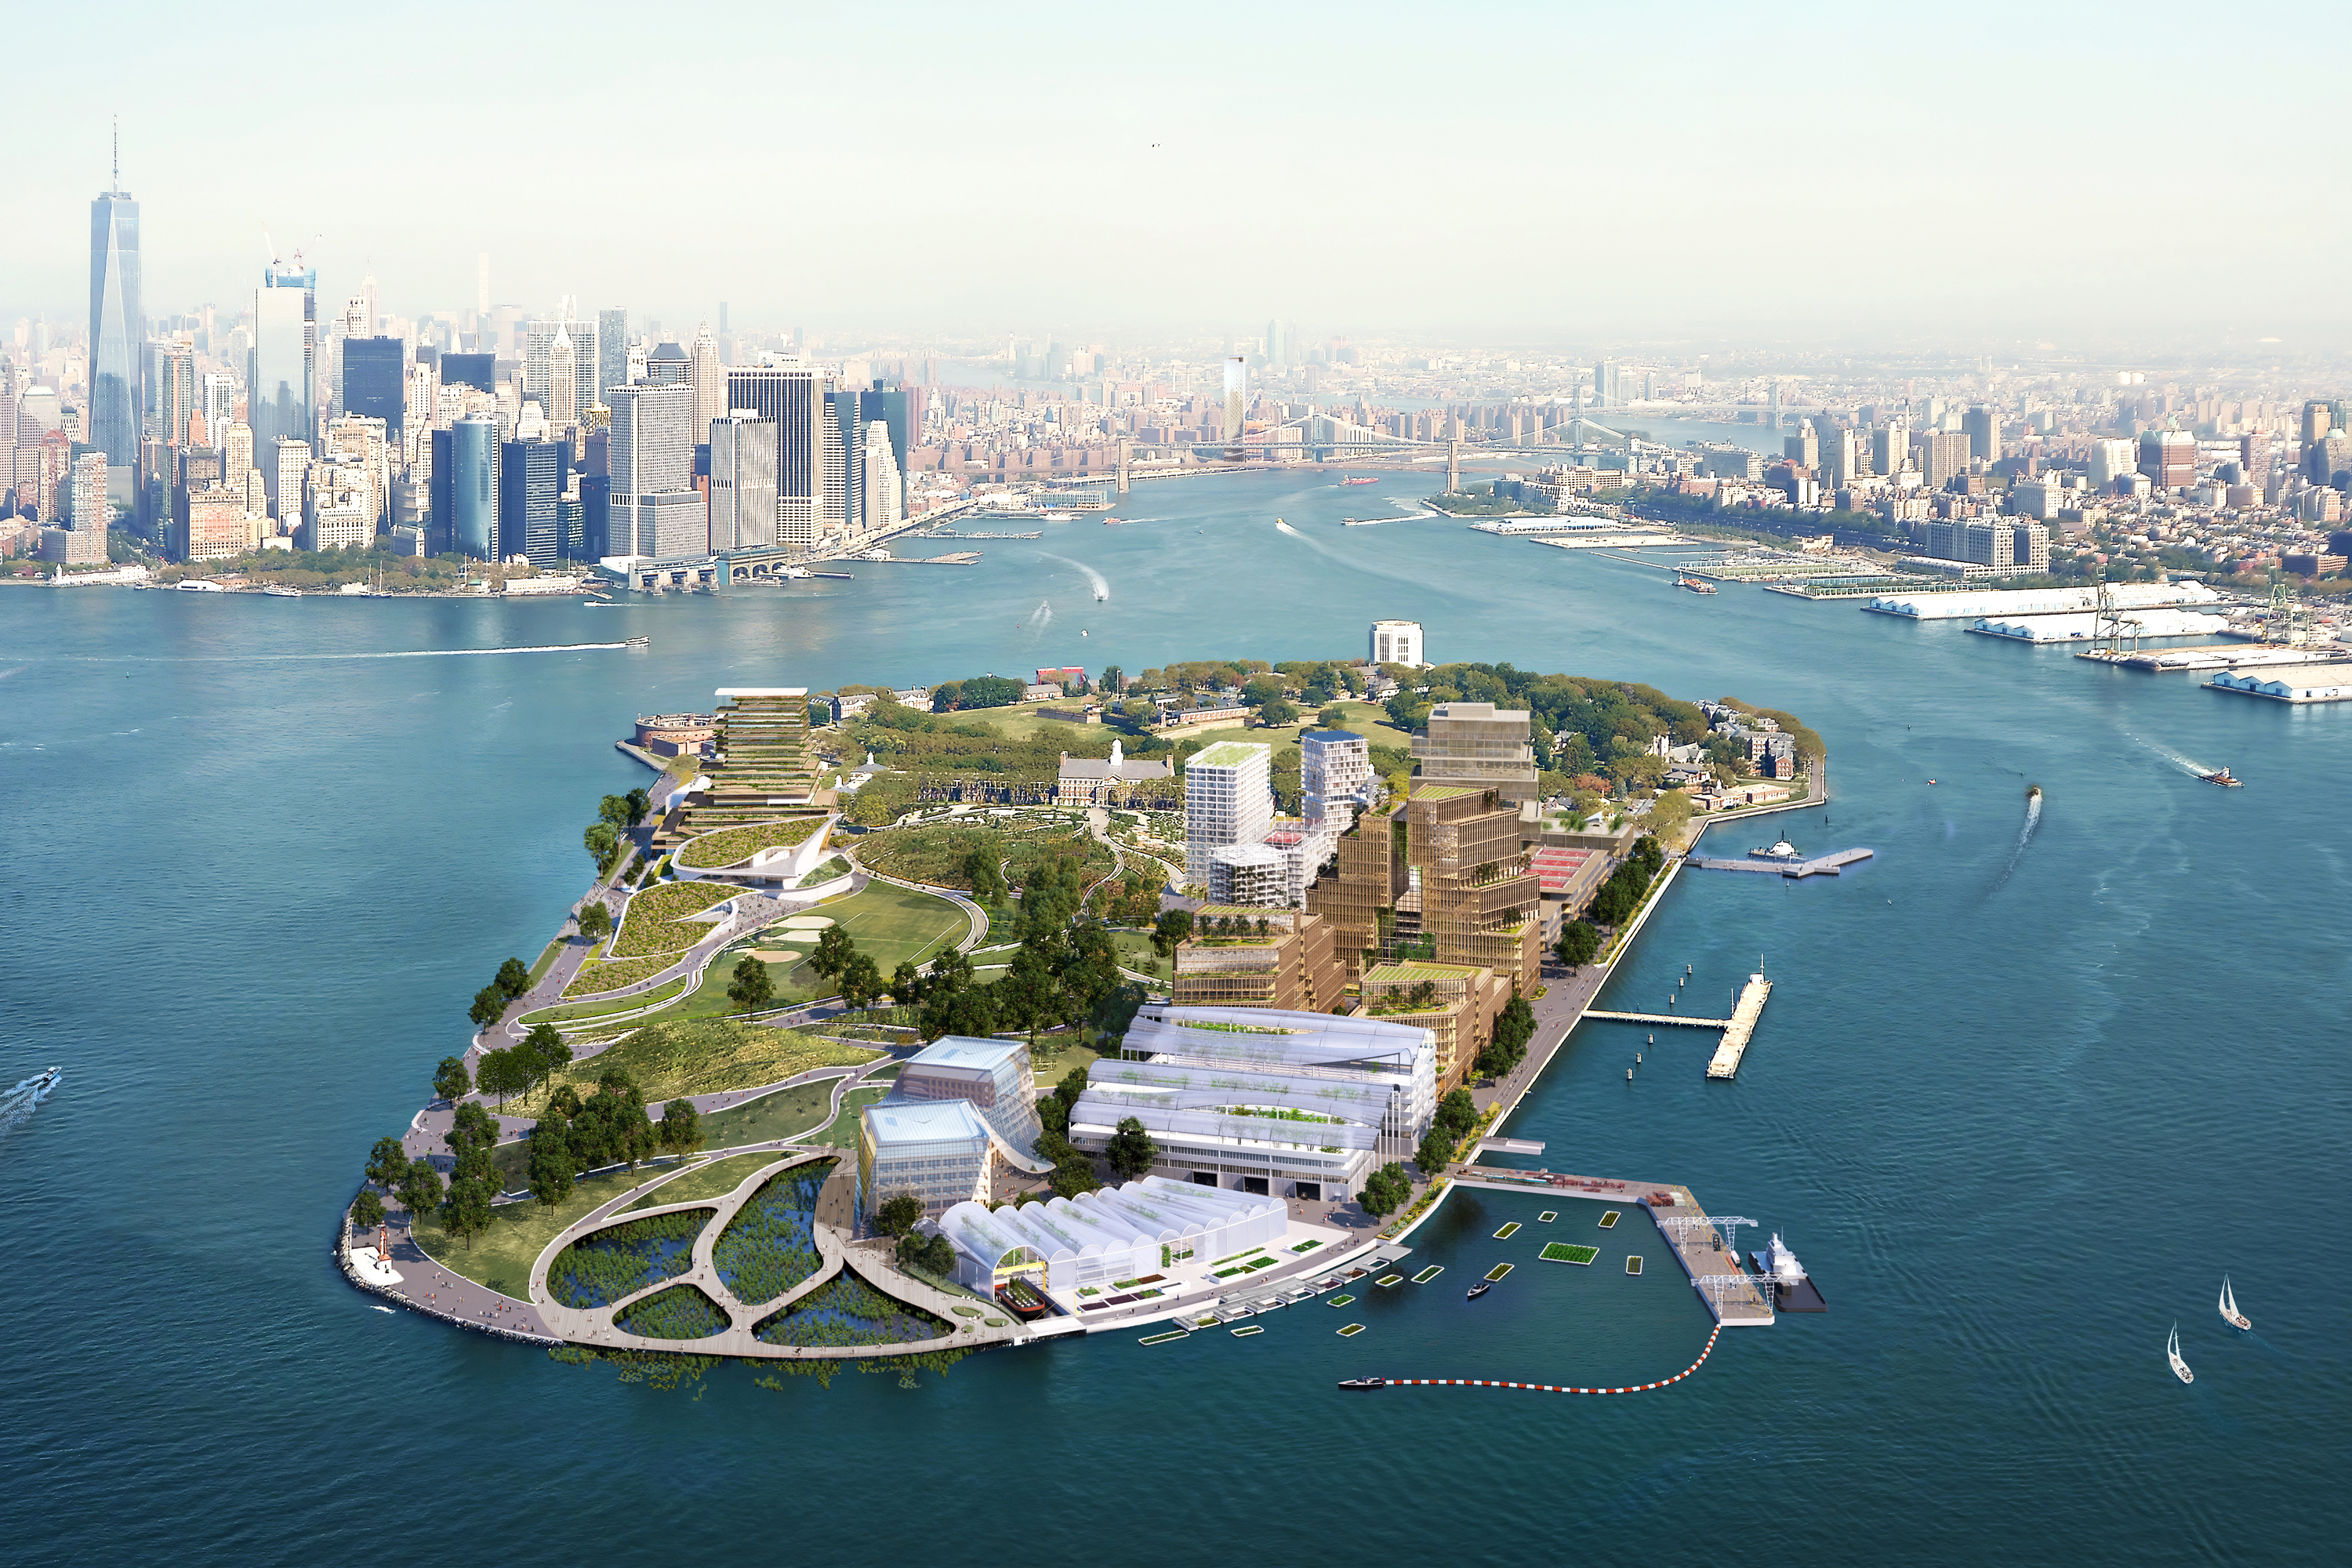 A rendering shows how Governors Island could look after rezoning for a new climate hub proposal.